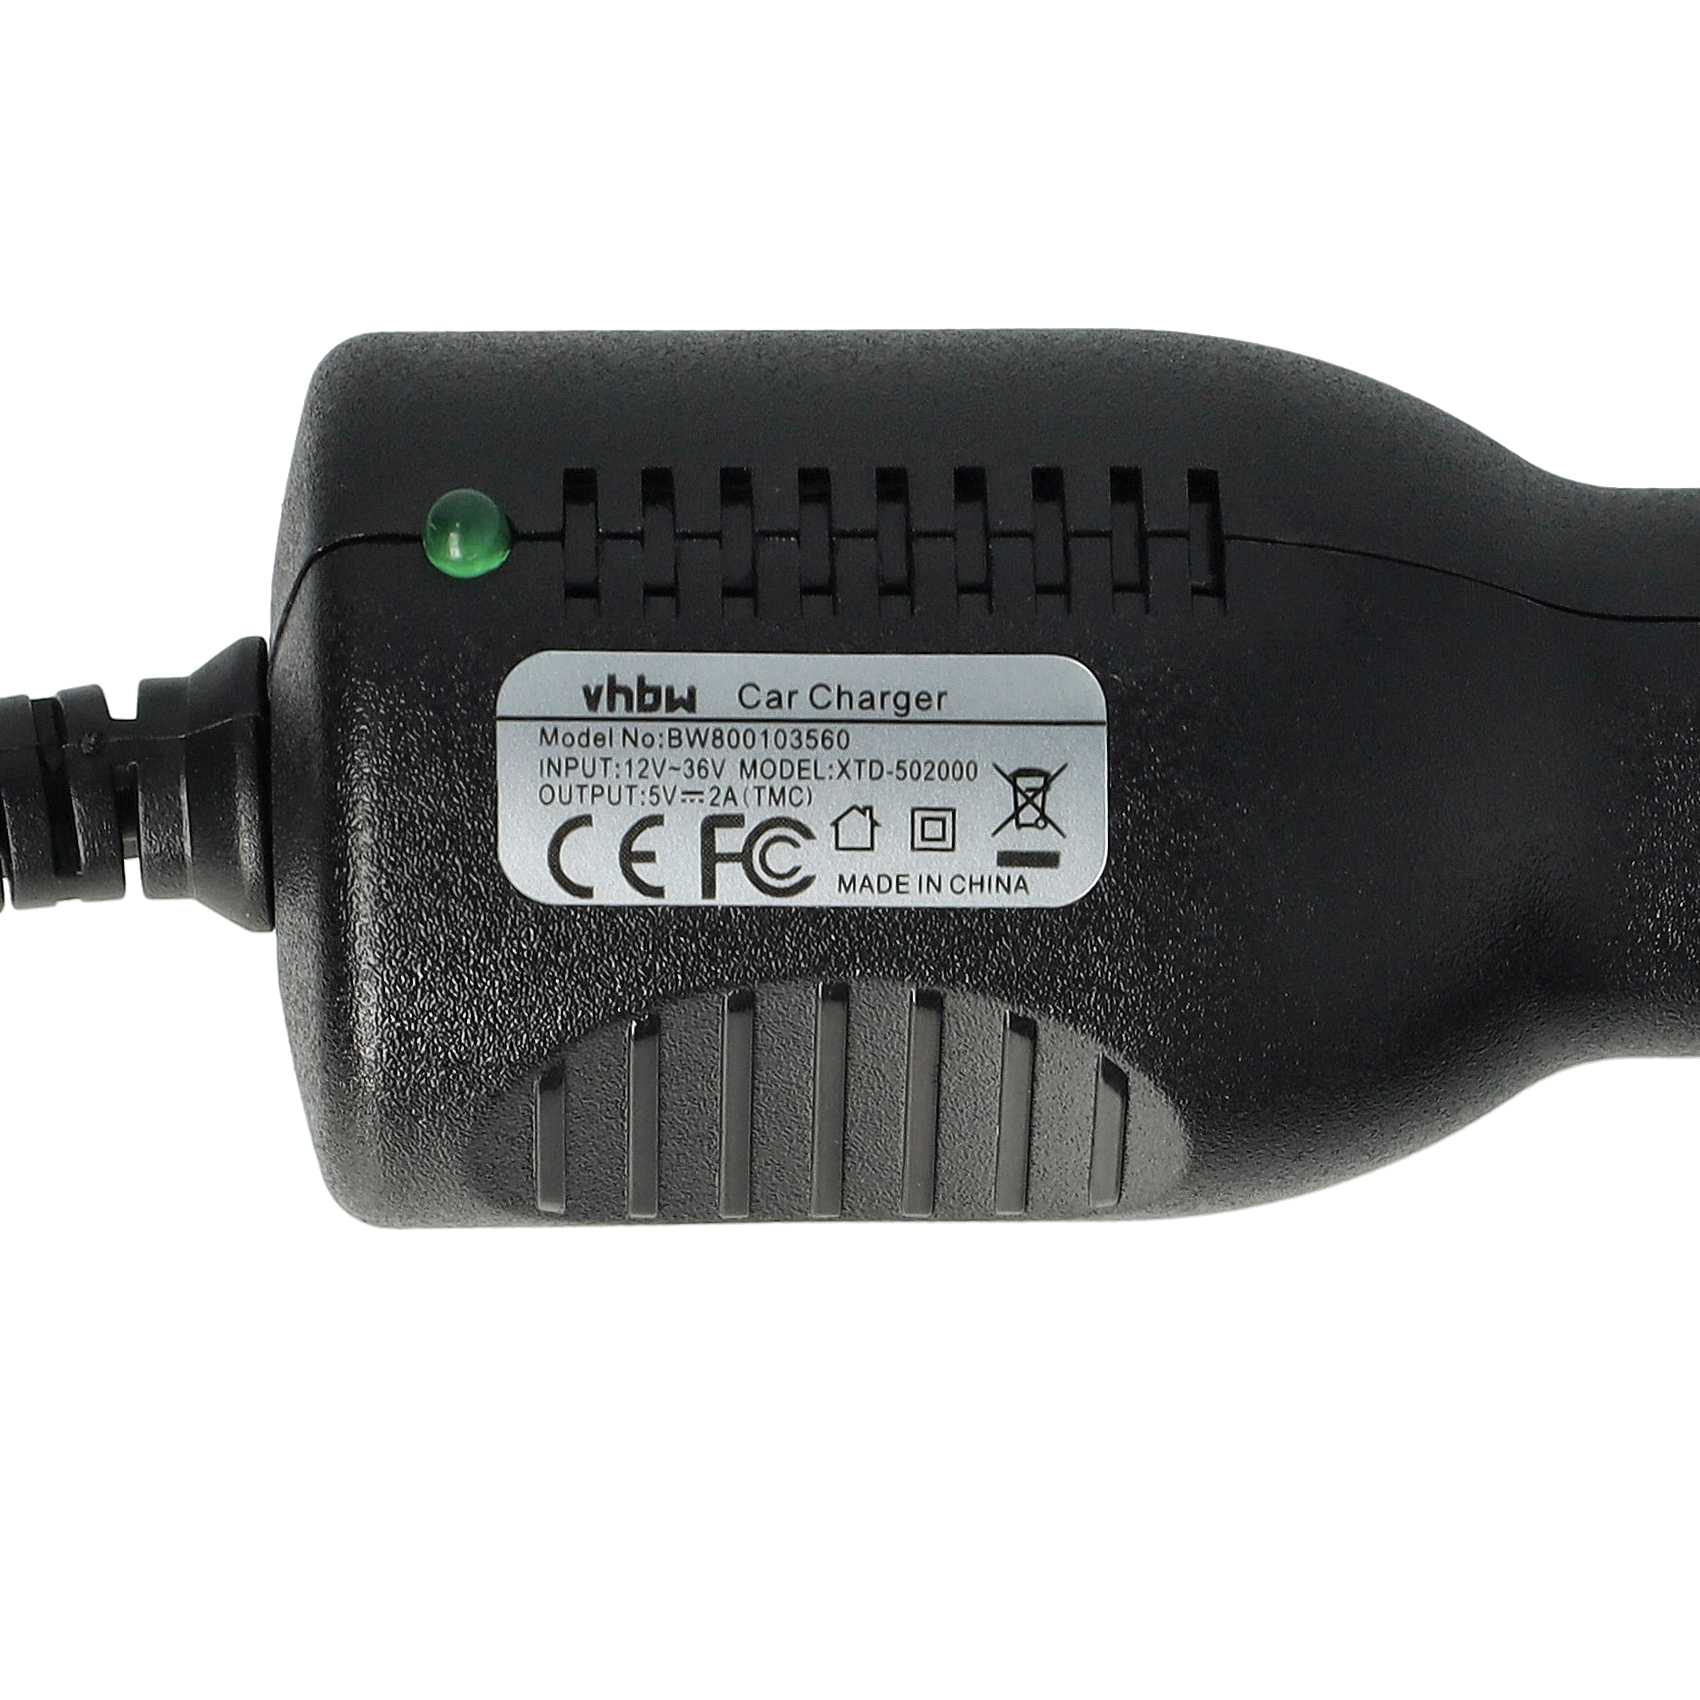 Mini-USB Car Charger Cable 2.0 A suitable forDevices like GPS, Sat Navs + Integrated TMC Antenna